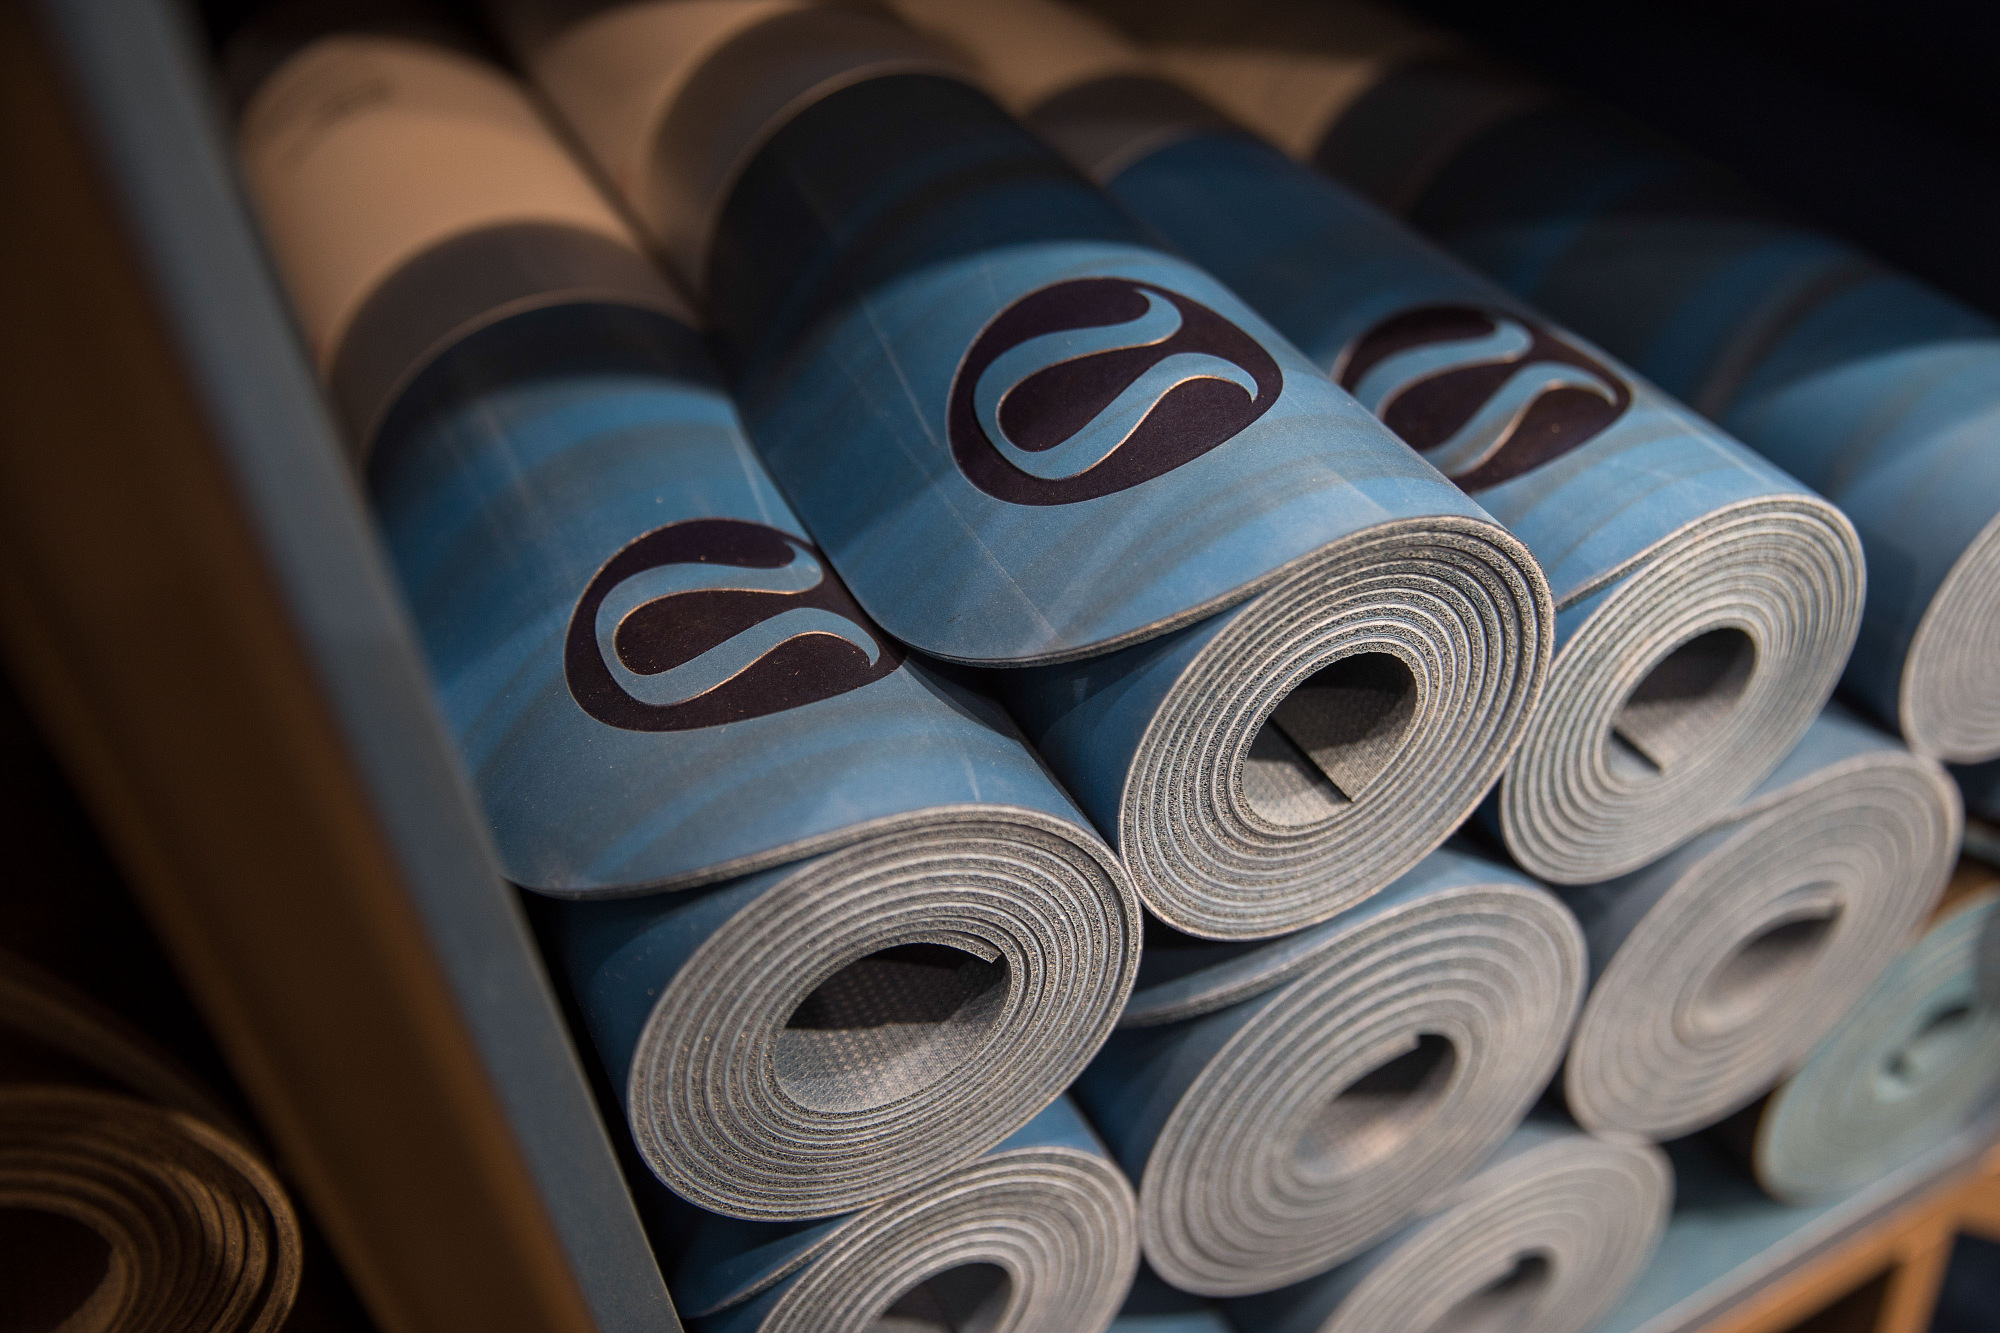 Lululemon Athletica sees margin squeeze in holiday quarter; shares